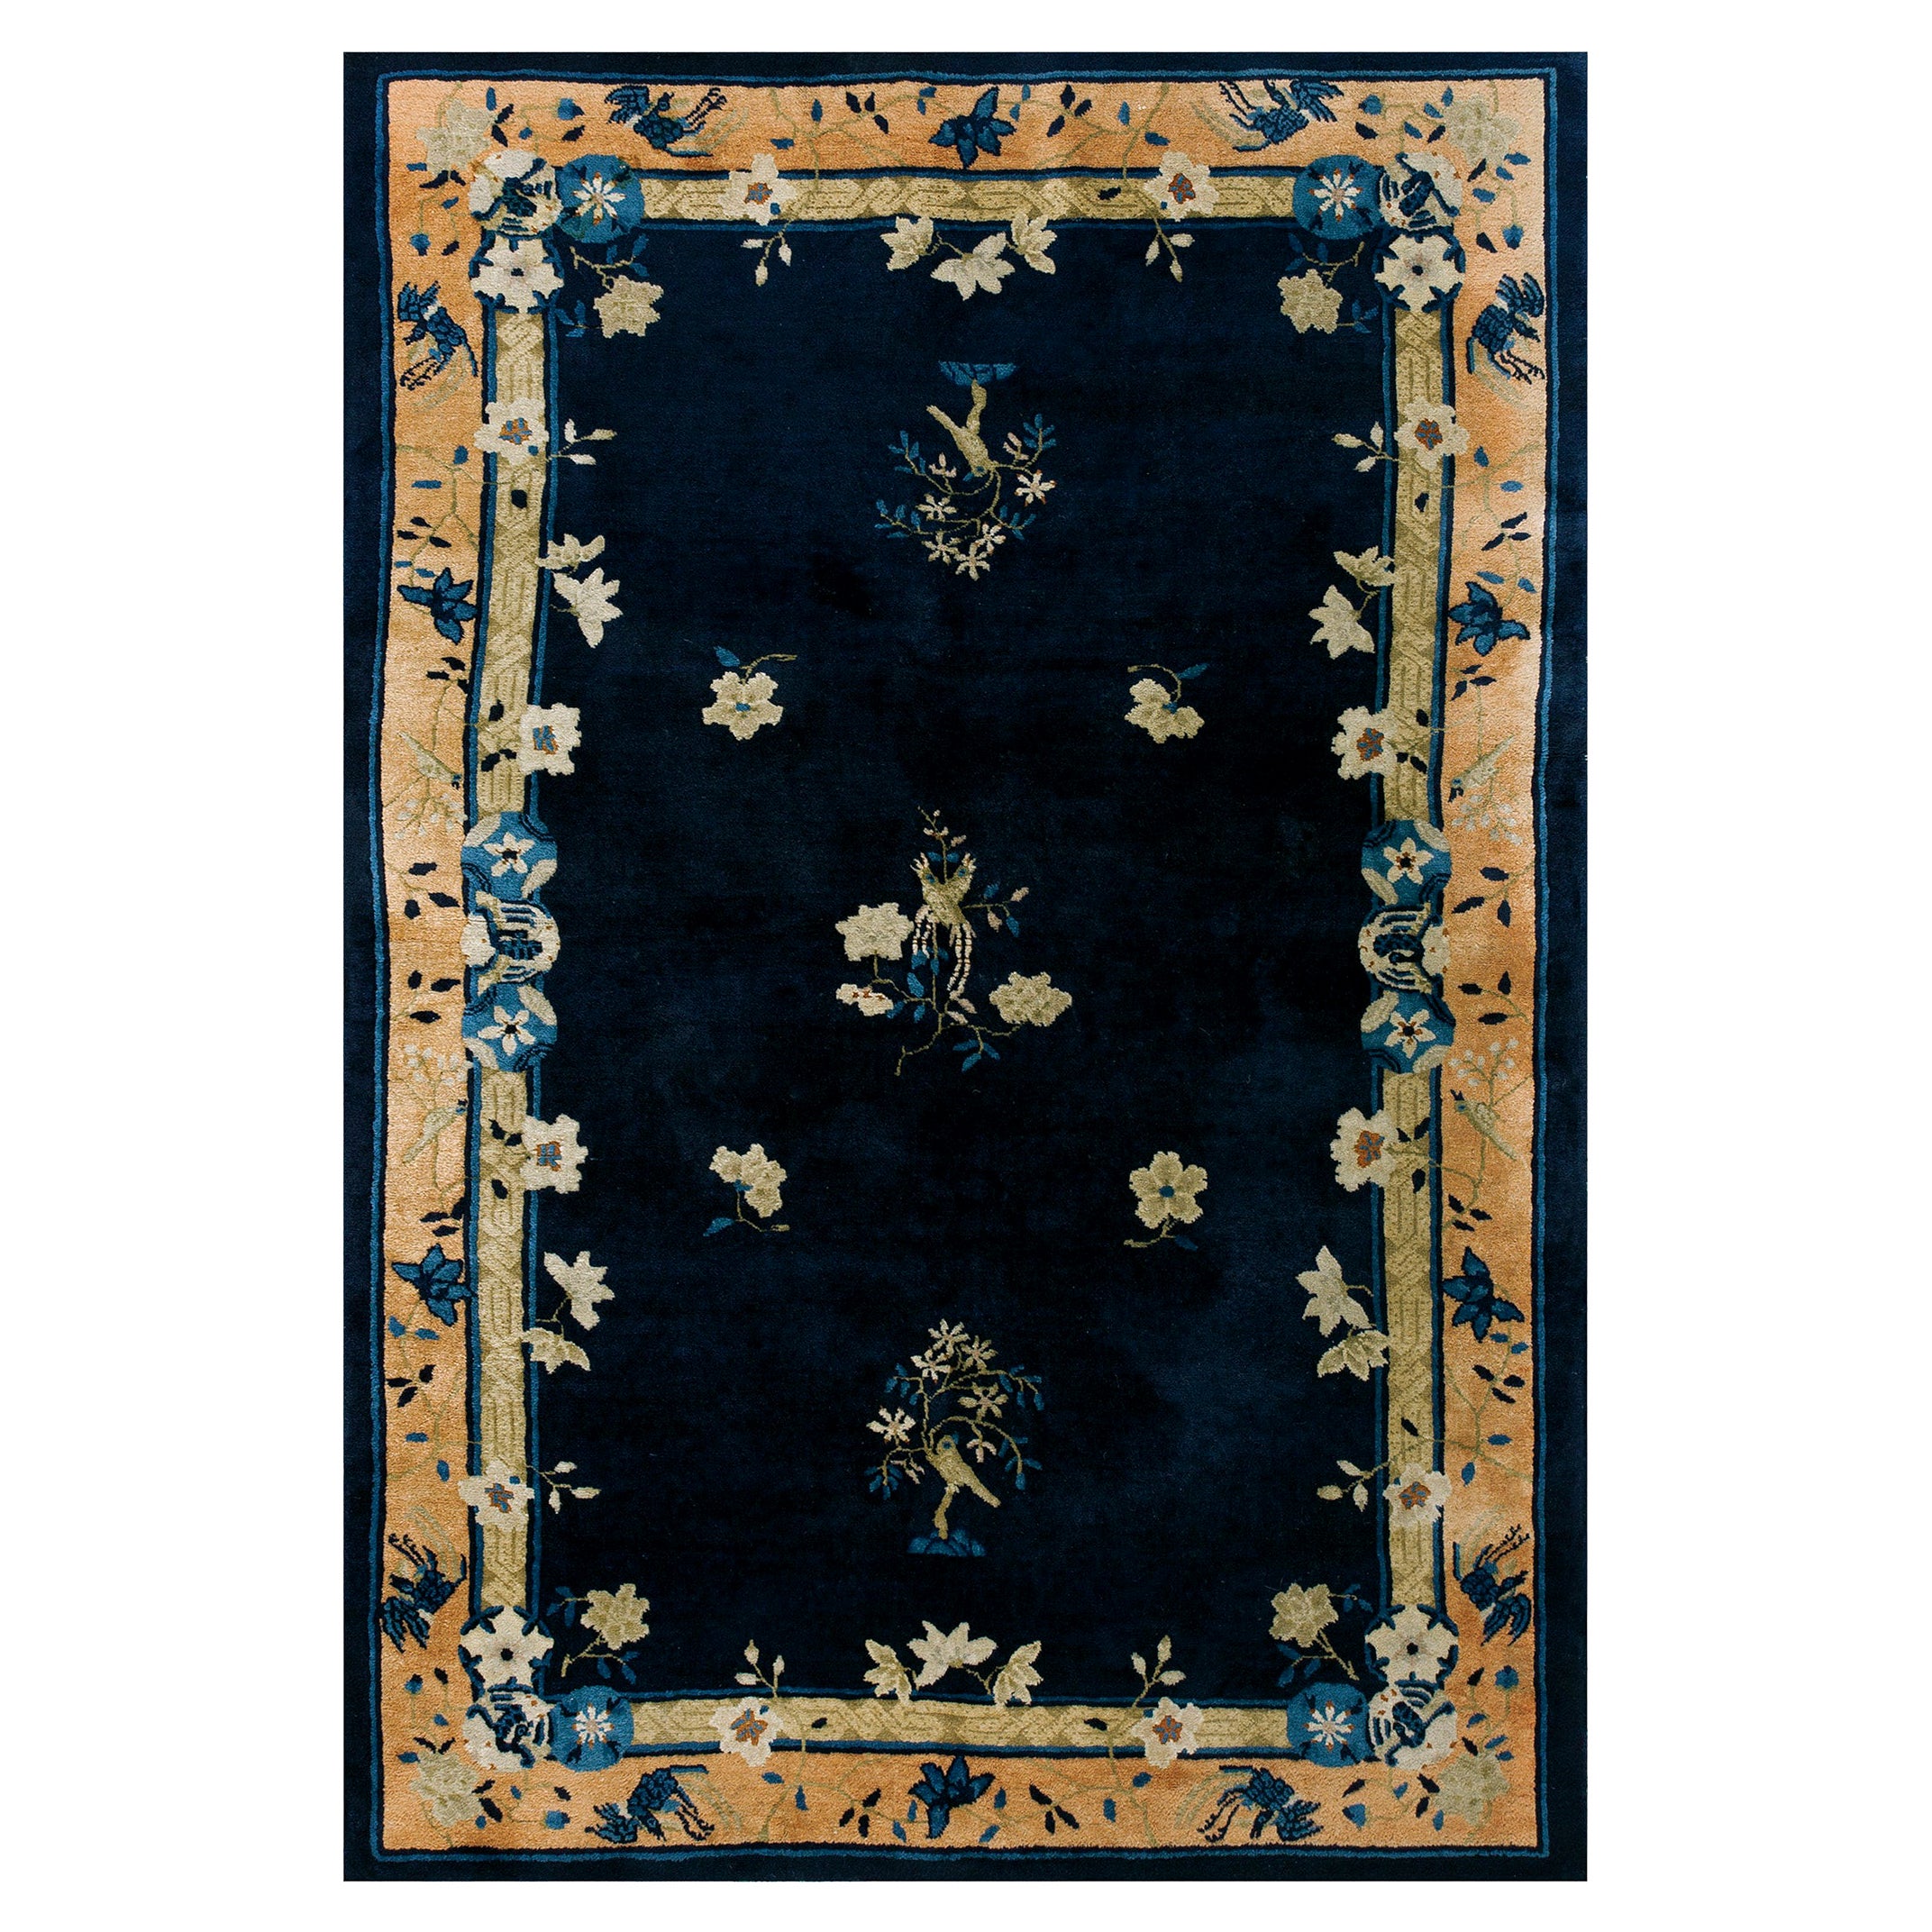 Late 19th Century Chinese Peking Carpet (  5'1" x 7'8" - 155 x 235 cm ) For Sale